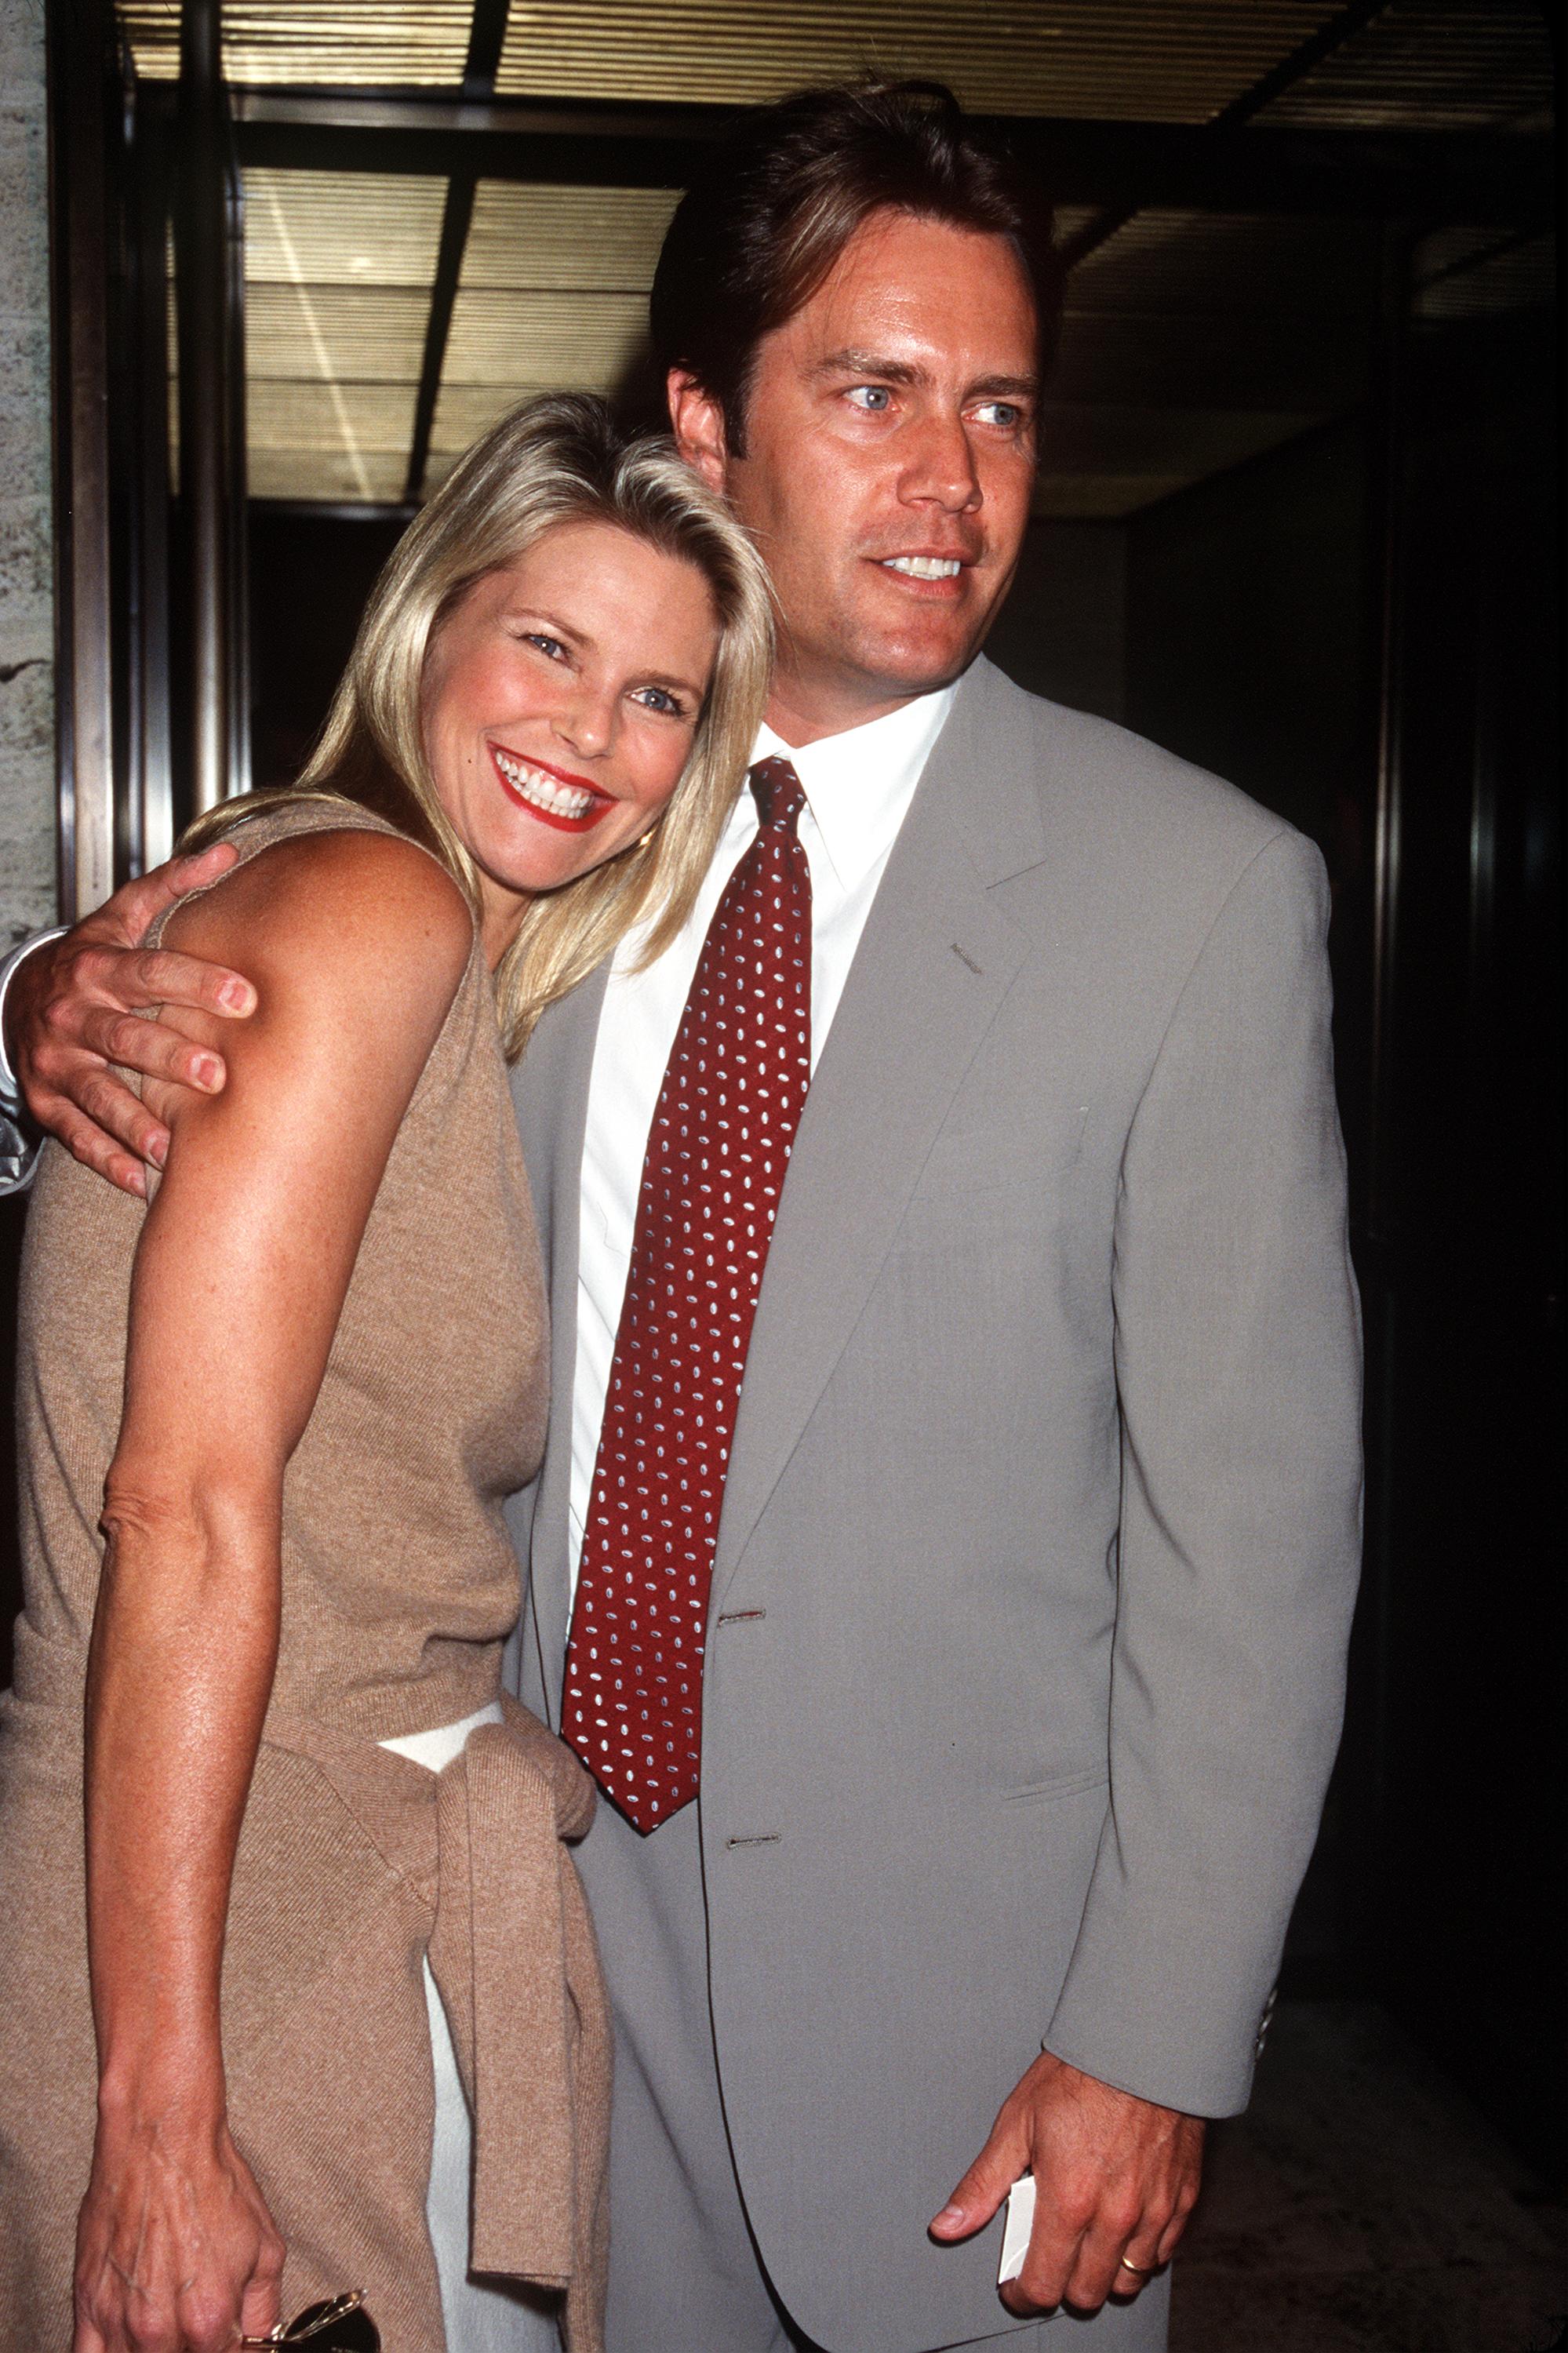  Christie Brinkley accompanies her husband, Peter Cook at a luncheon to celebrate the launch of DKNY The Men's Fragrance September 13, 2000 in New York, NY | Source: Getty Images